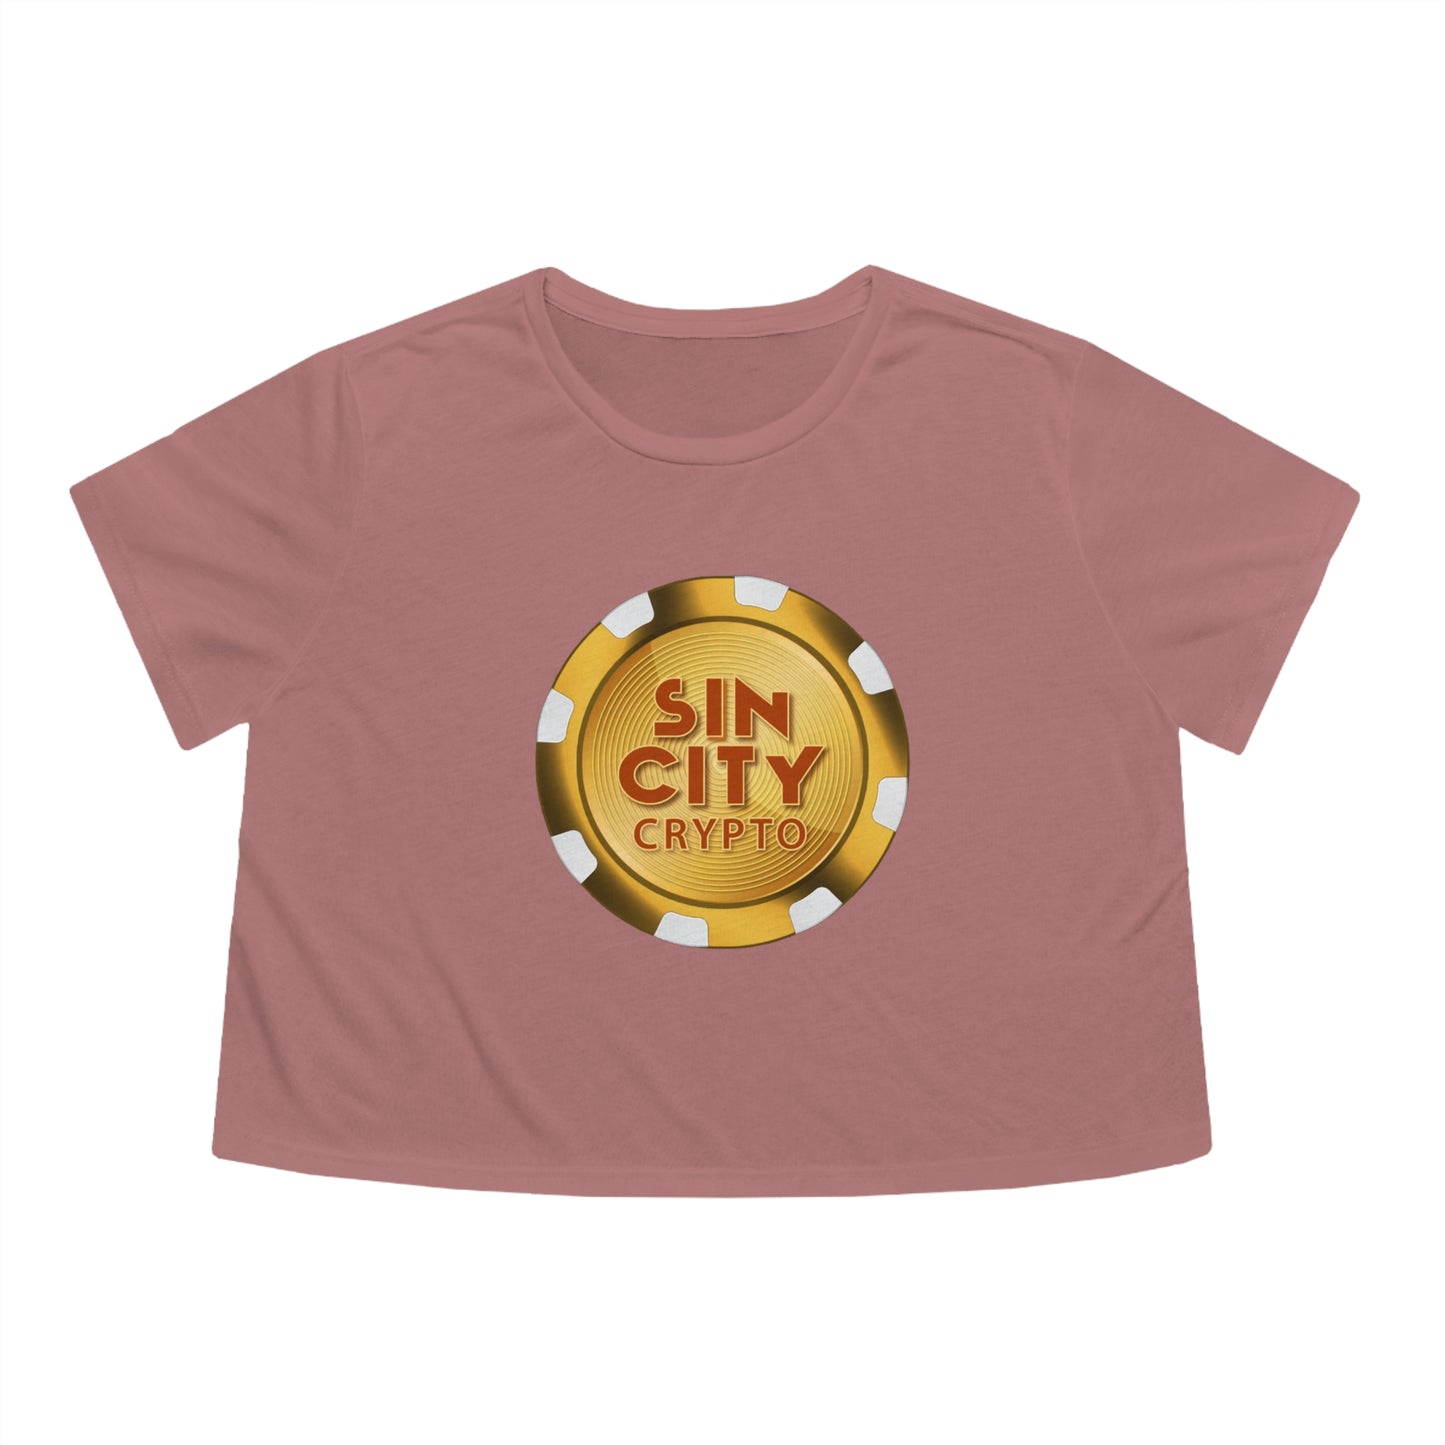 Sin City Crypto Cropped T-Shirt